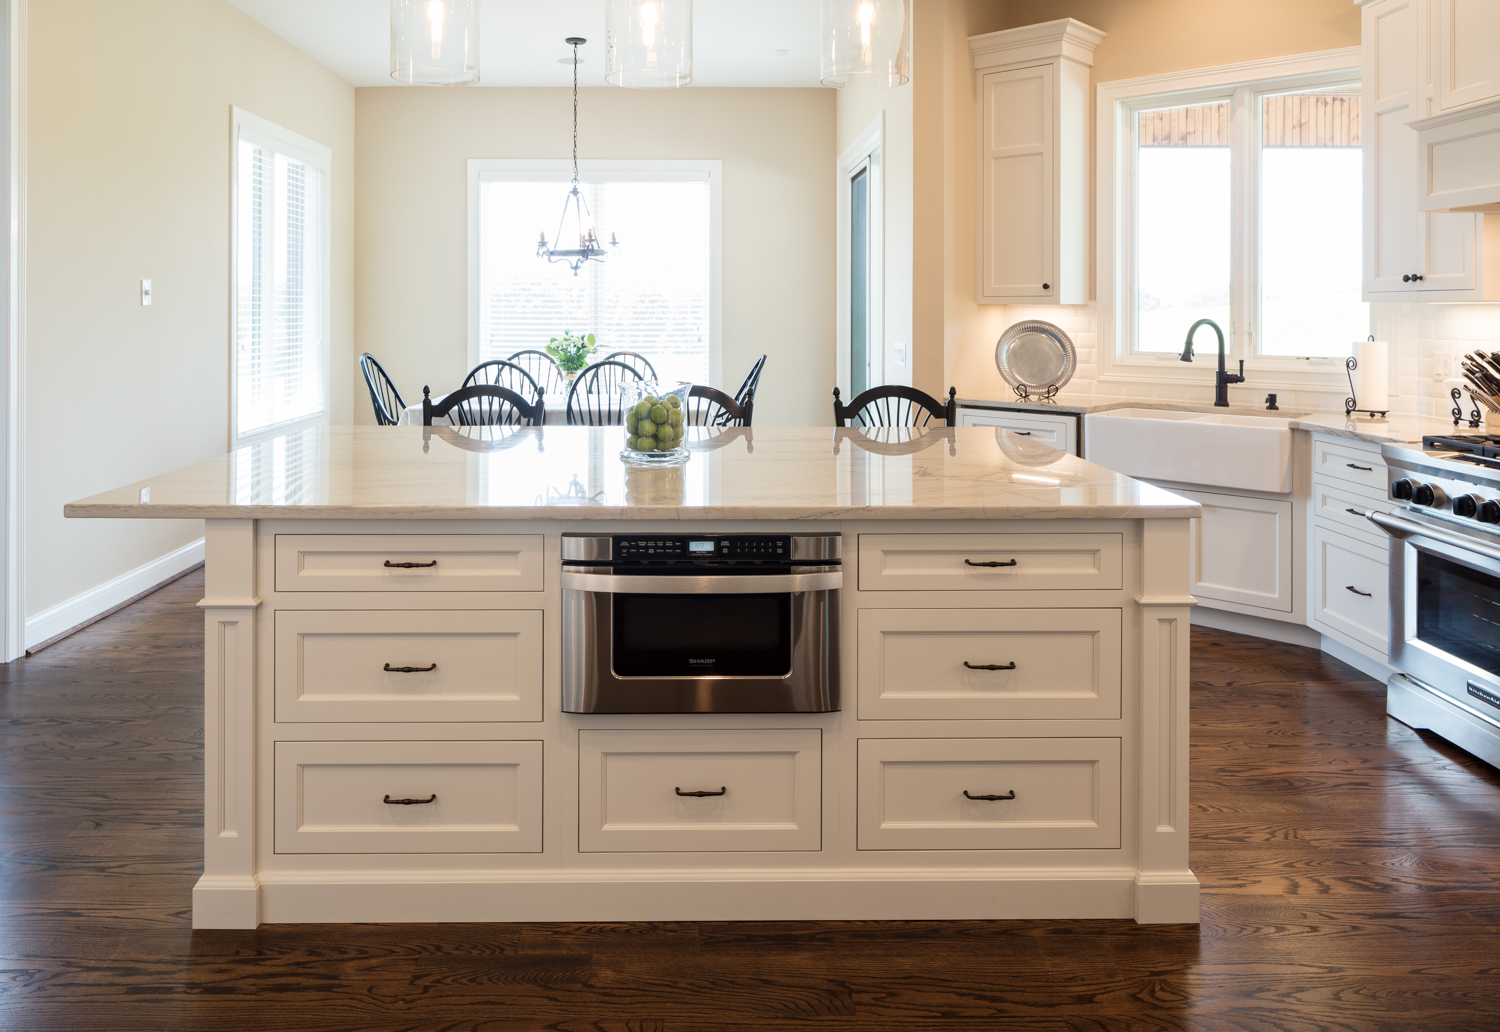 Decorator White Inset Cabinets (Neyer) – Western Custom Cabinetry